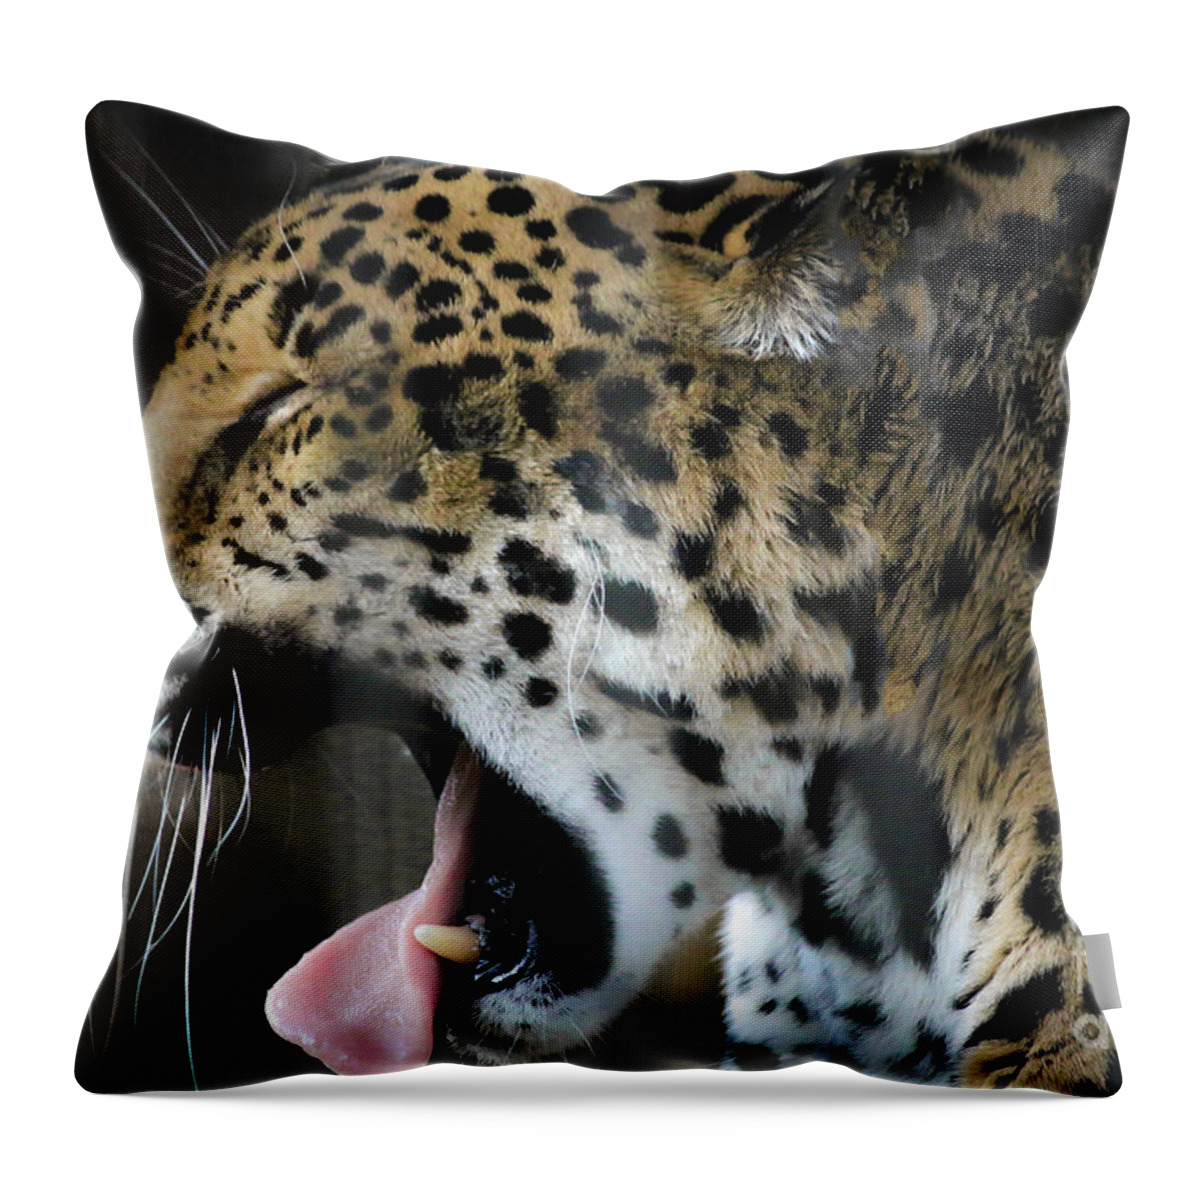 Spotted Jaguar Throw Pillow featuring the photograph Spotted Jaguar Memphis Zoo by Veronica Batterson